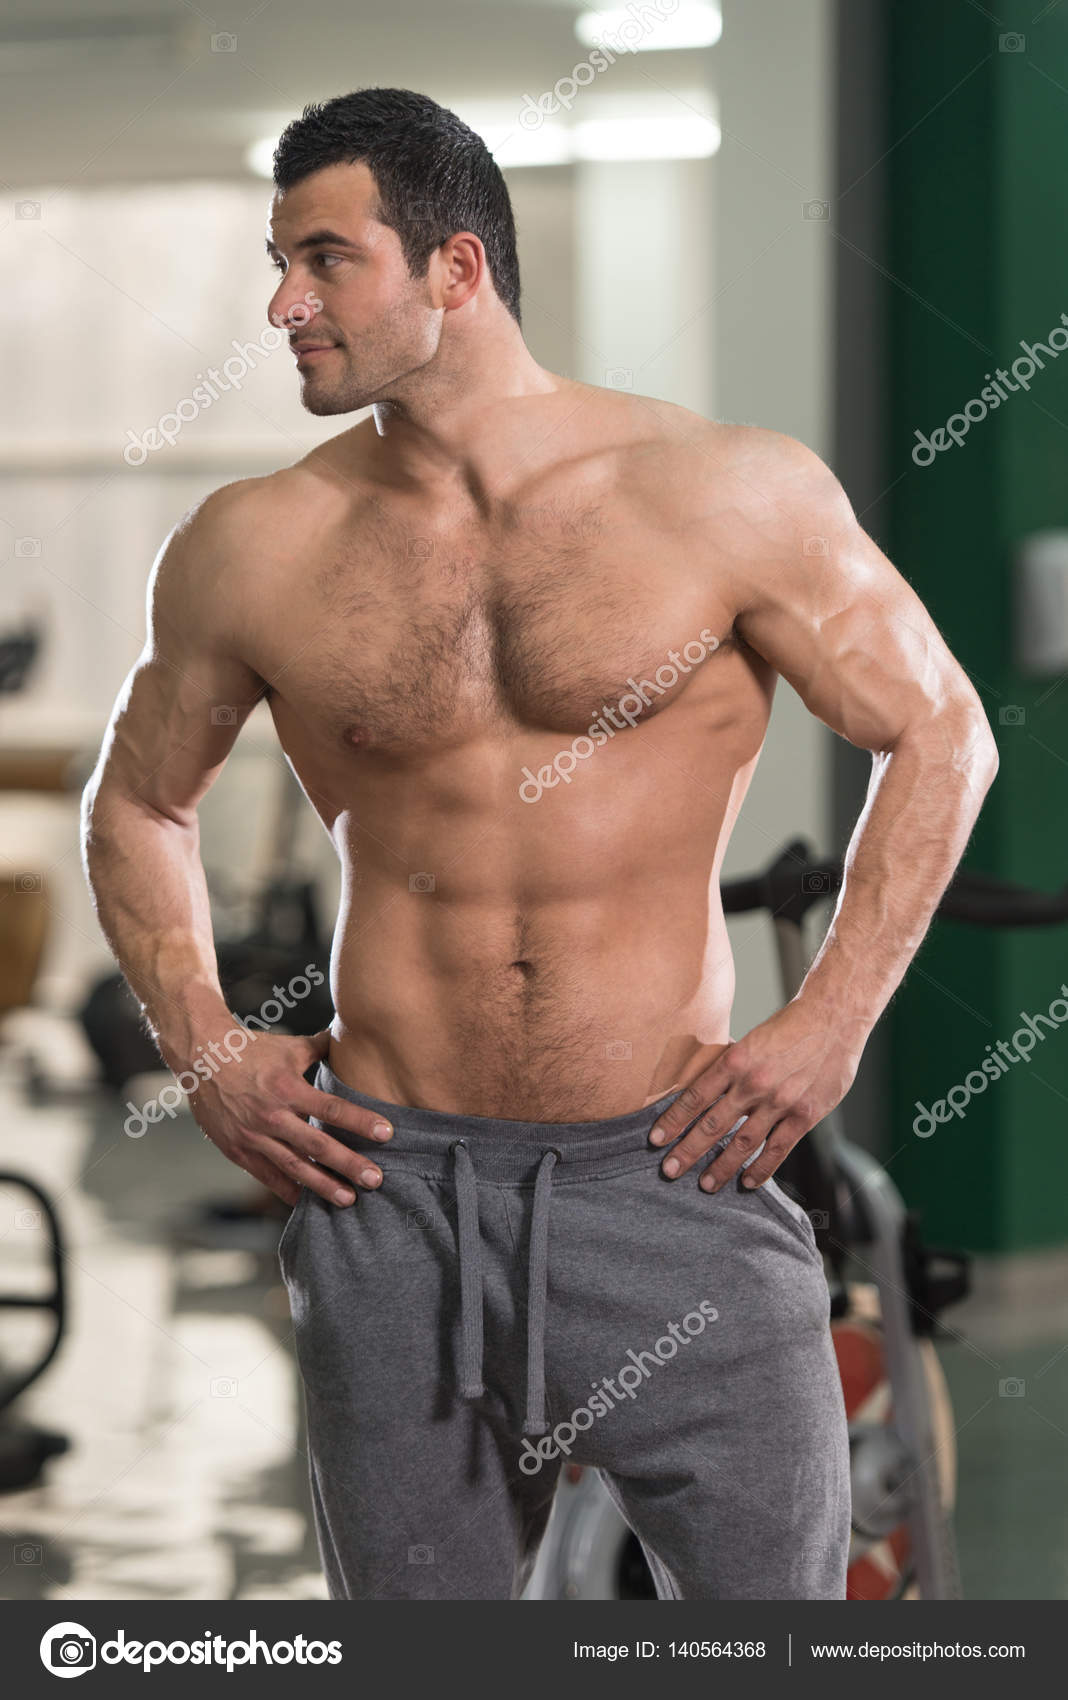 Muscle men hairy 34 Handsome